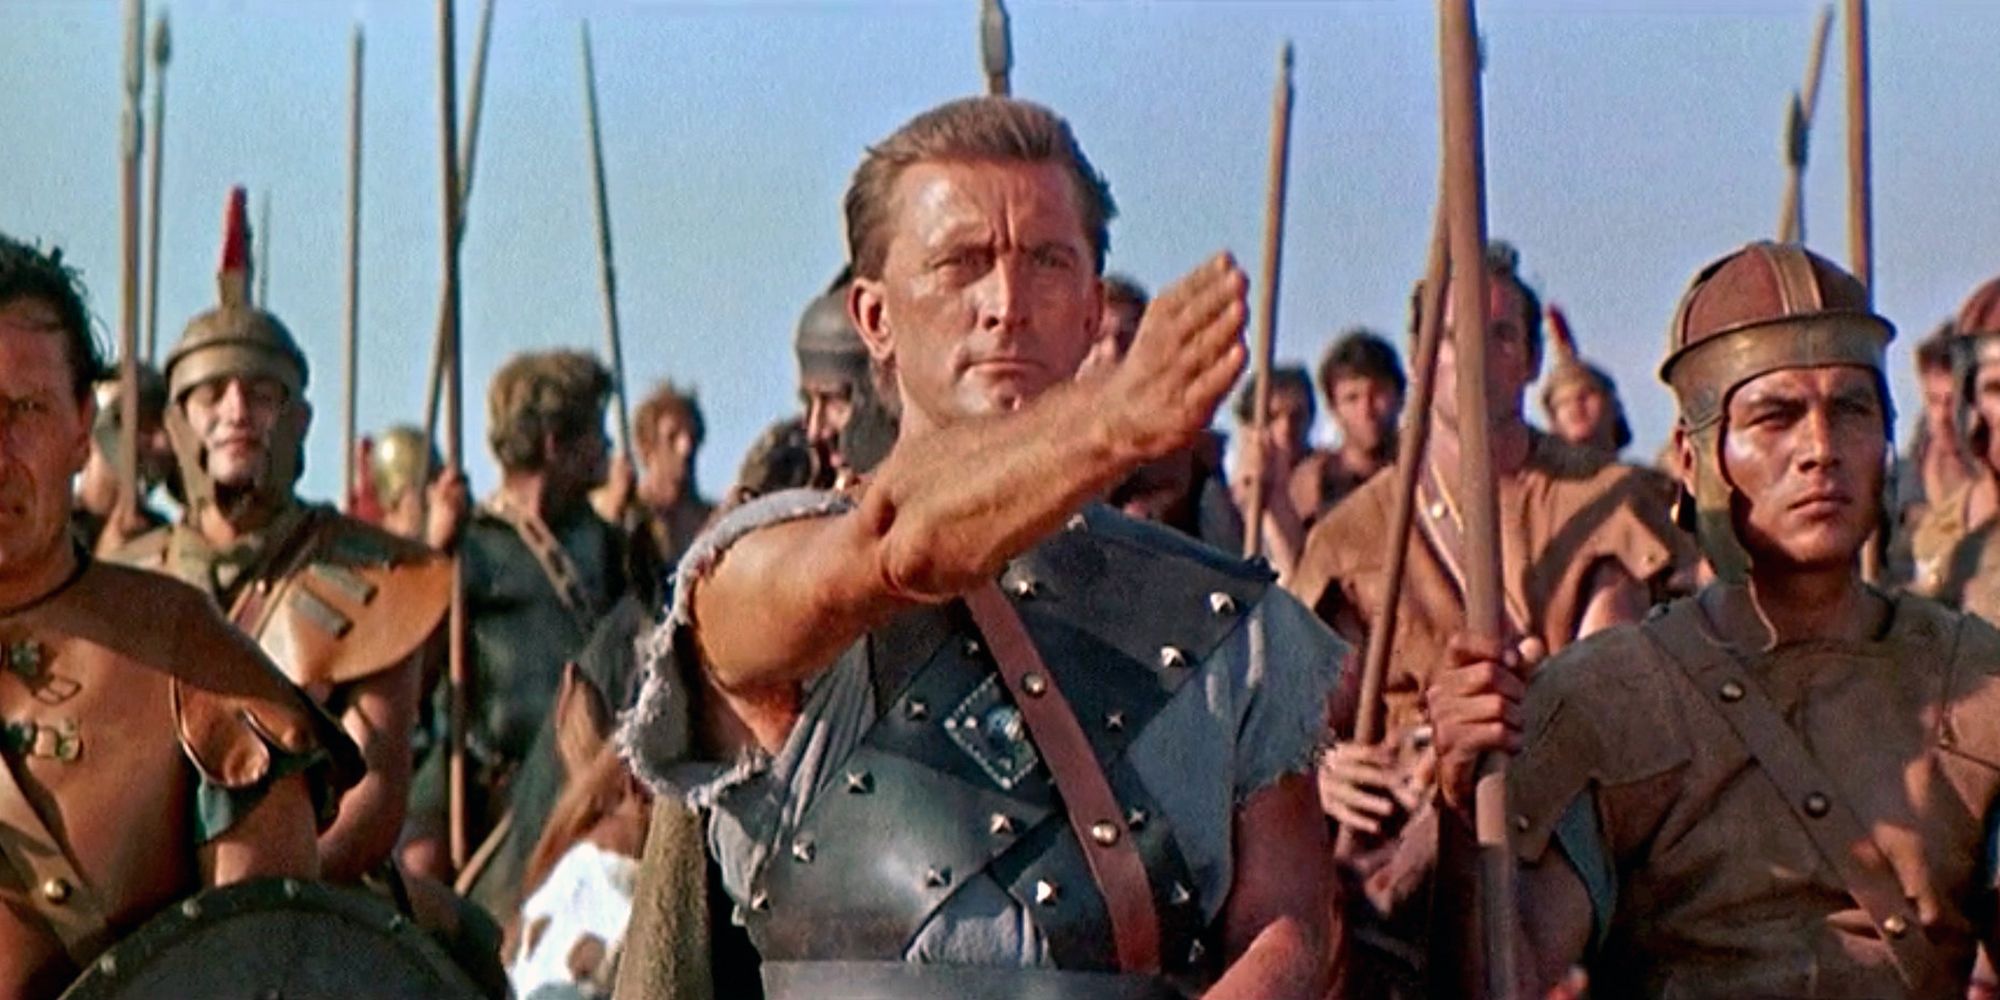 'Spartacus' comes close to being wholly historically correct